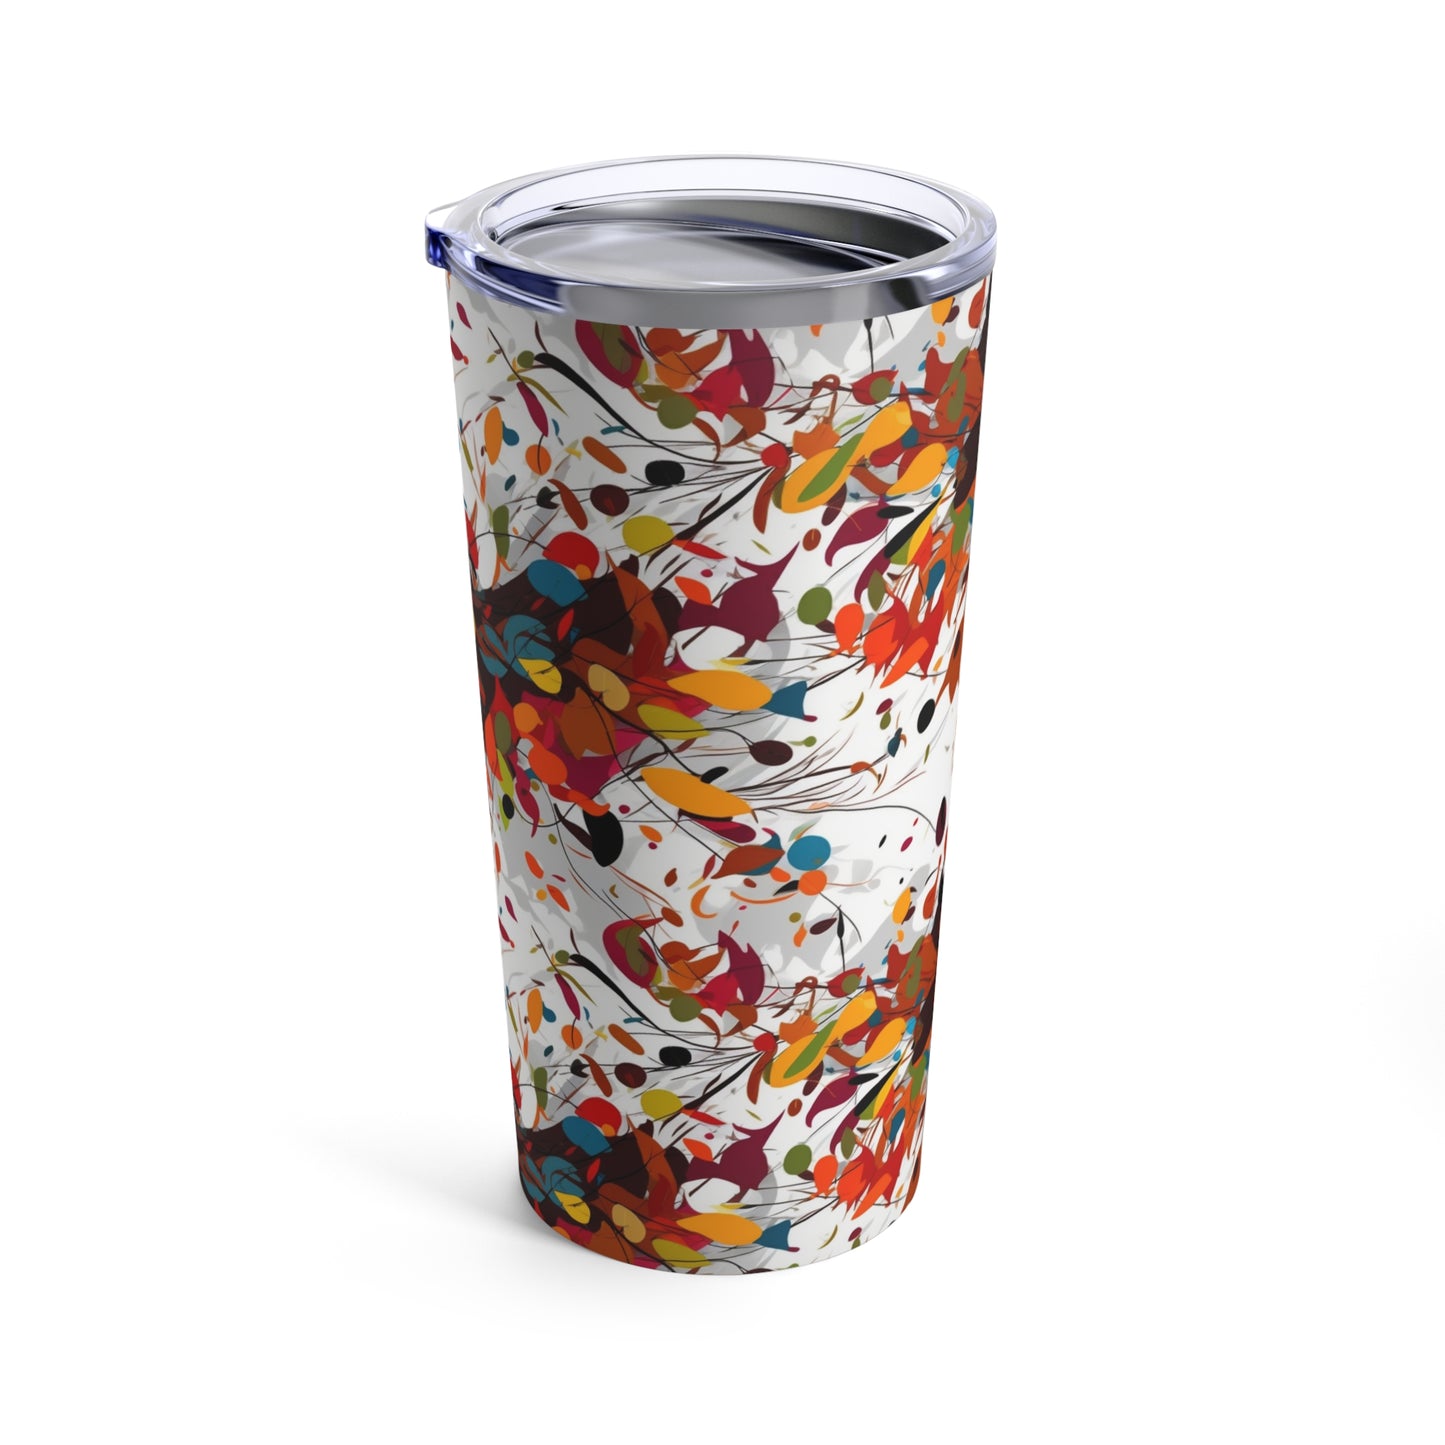 3D Vibe Different Color And Size Shapes Seamless Design 20 Oz Skinny Tumbler Wrap.